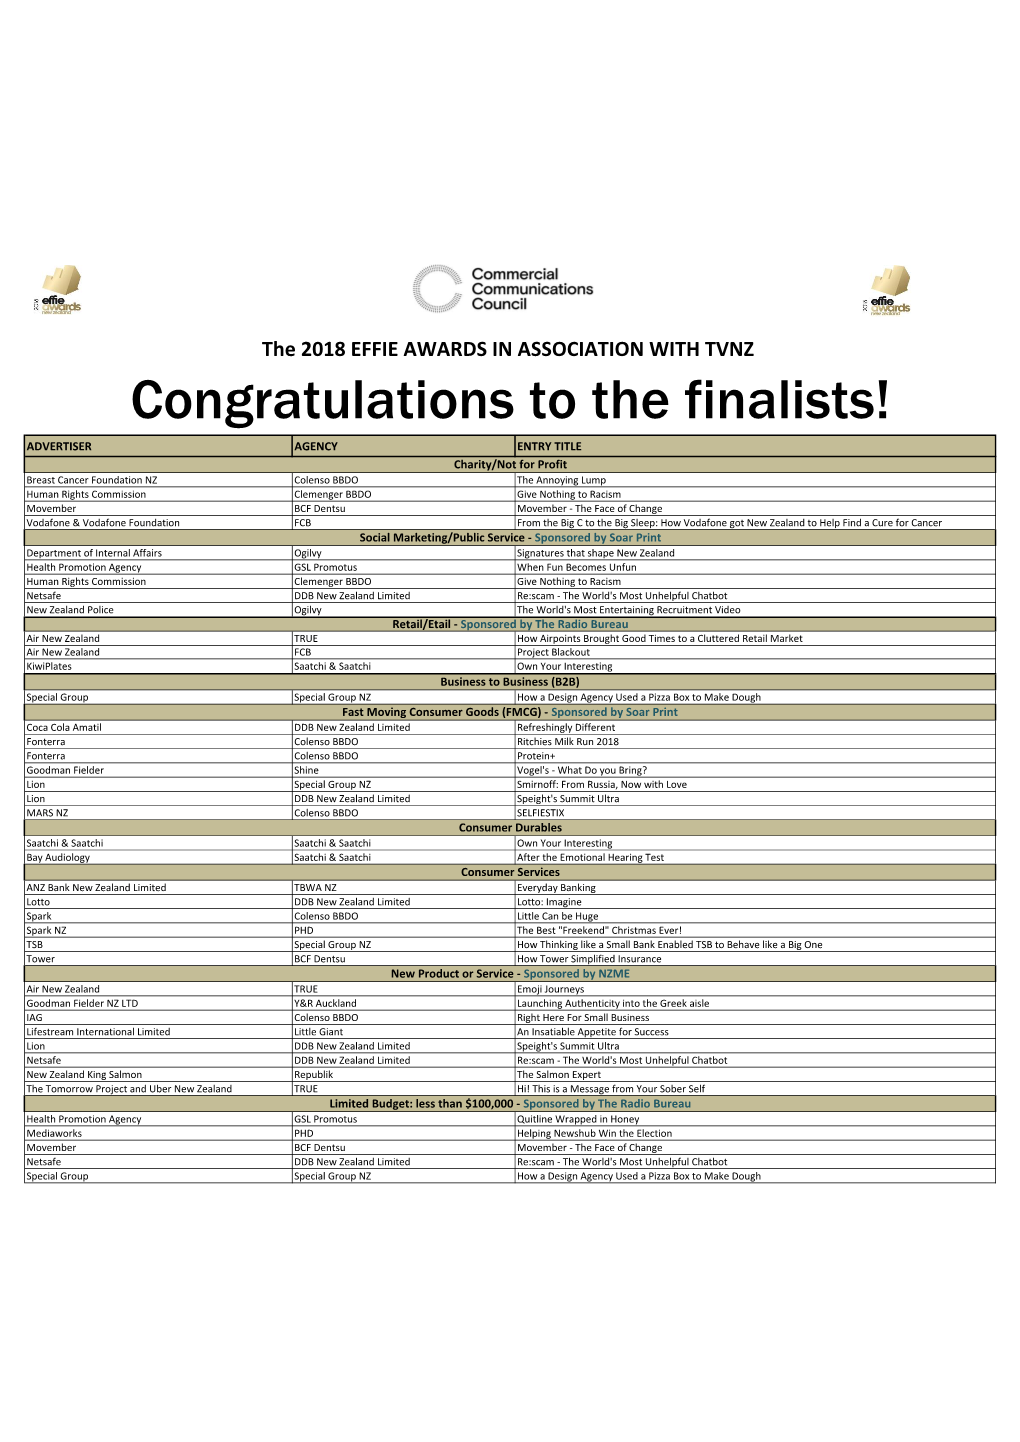 Congratulations to the Finalists!